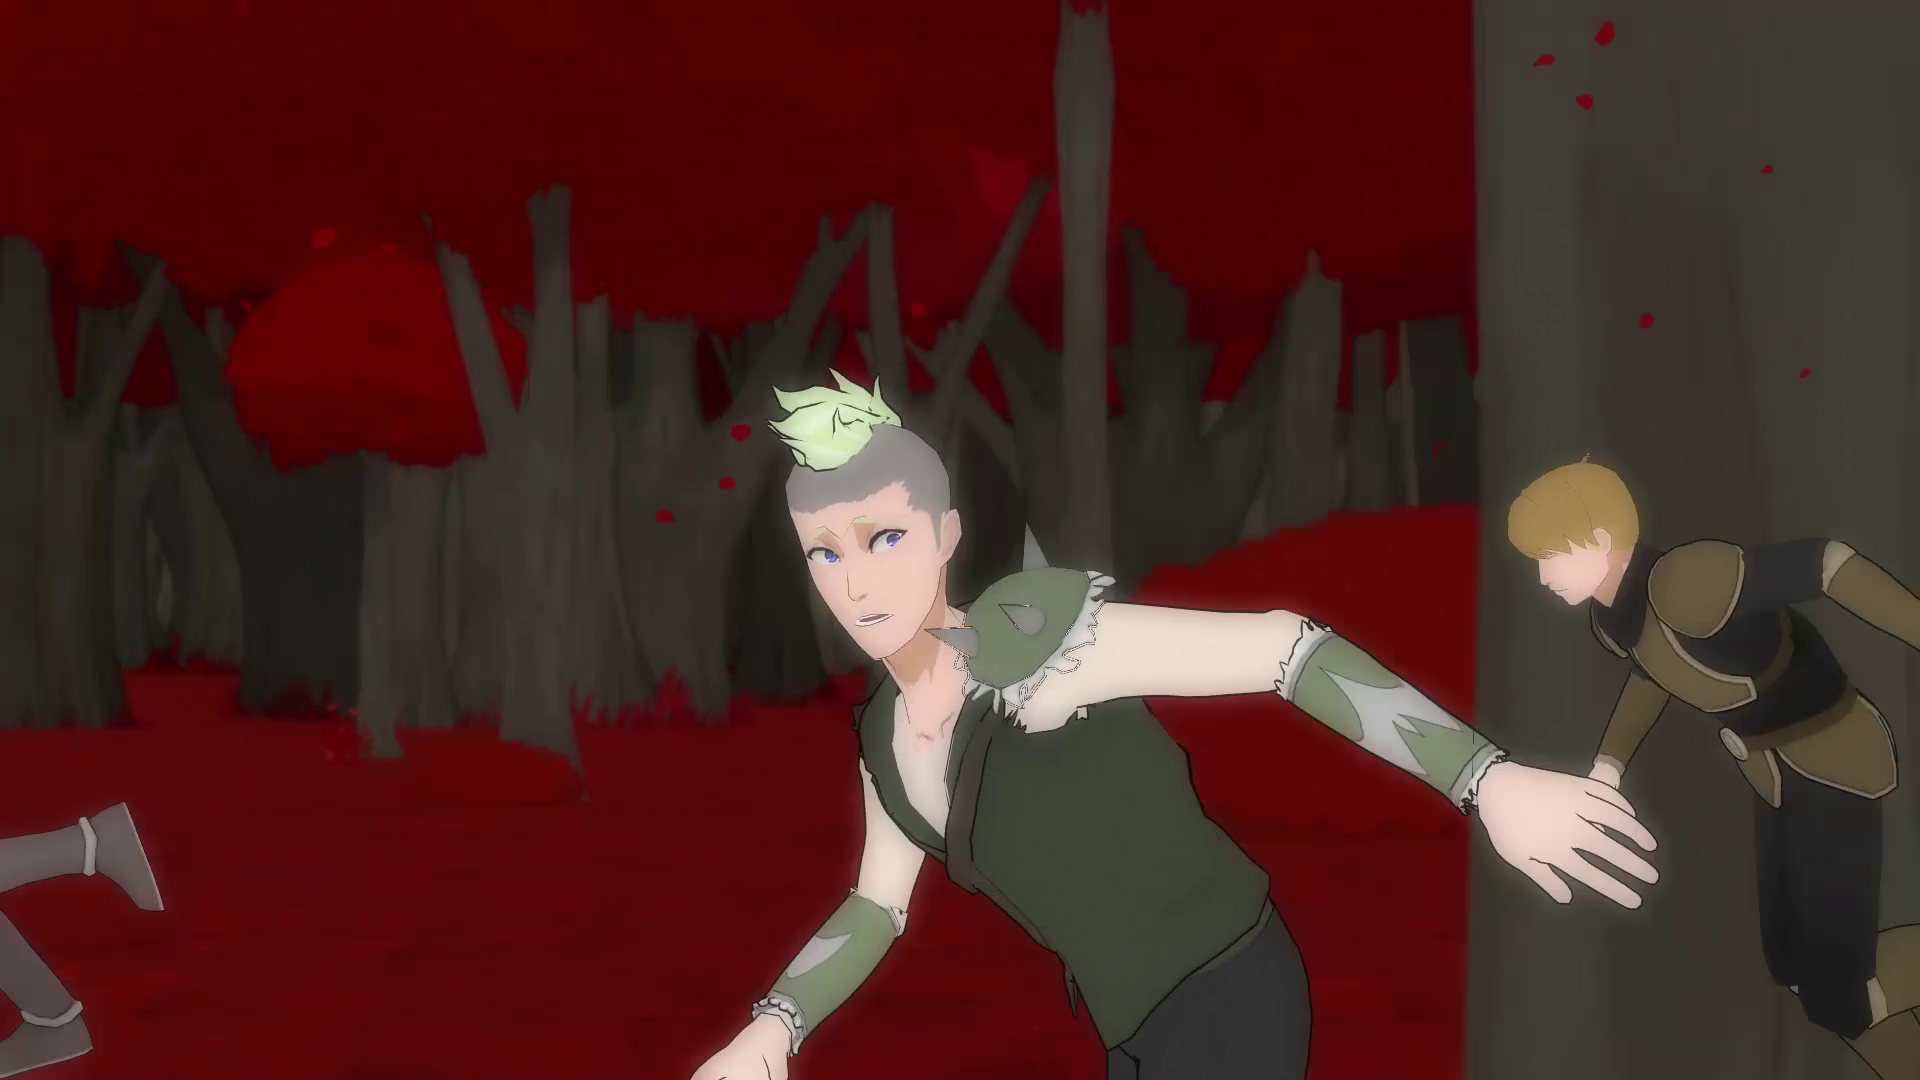 Image 1114 Forever Fall Pt2 03559png Rwby Wiki Fandom Powered By Wikia 6670